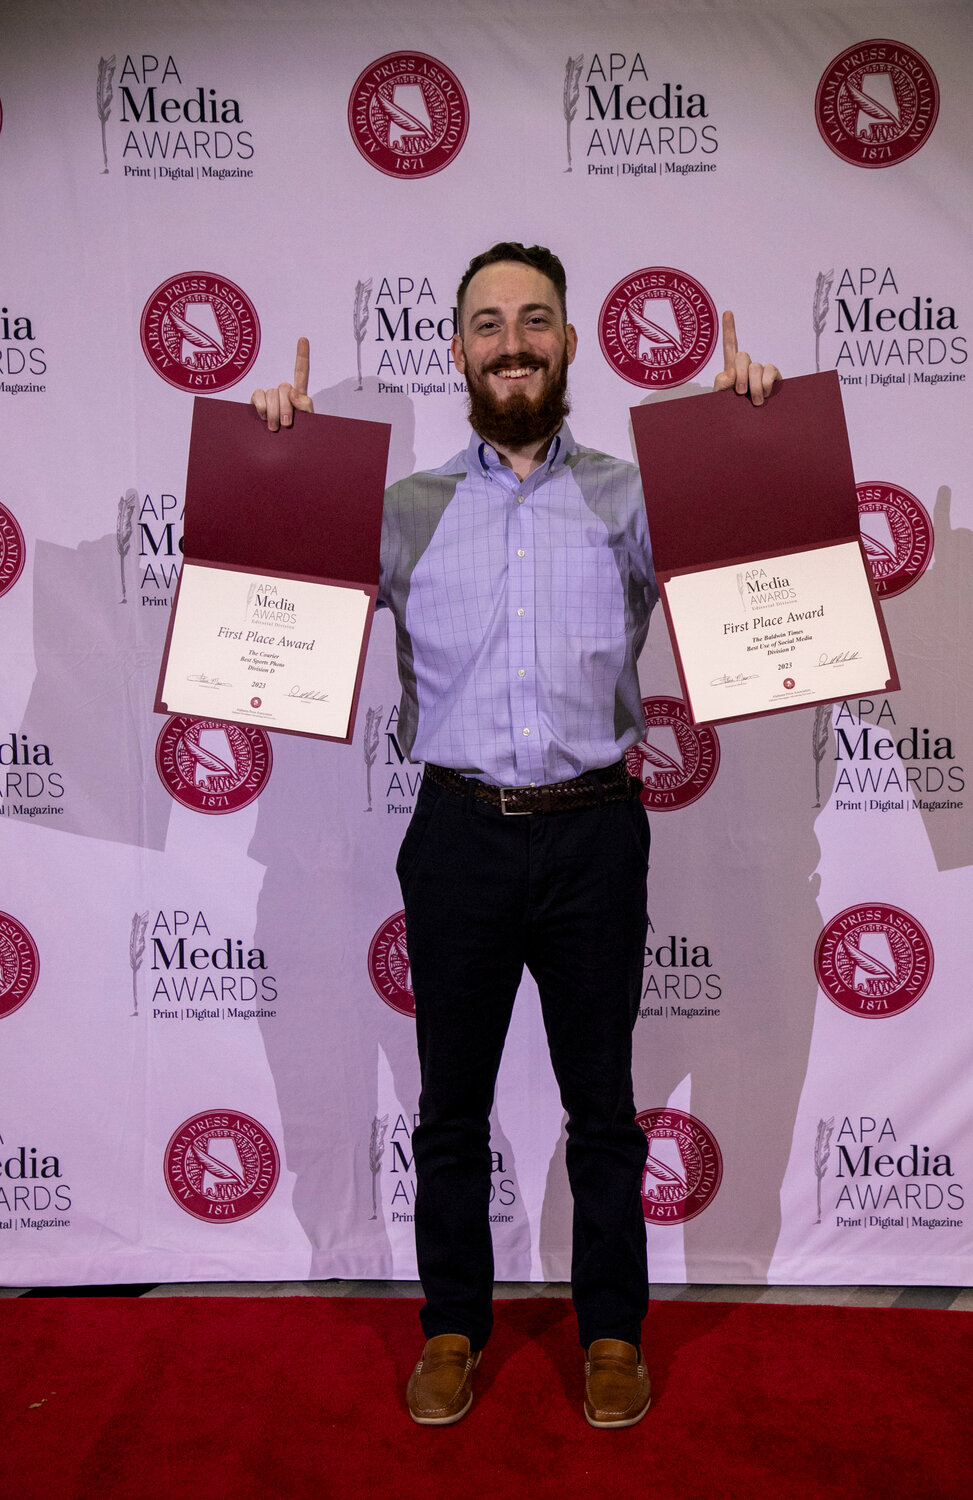 At Saturday’s banquet for the Alabama Press Association’s media awards in Orange Beach, first-place honors for sports photography and use of social media went to Gulf Coast Media and Sports Editor Cole McNanna.